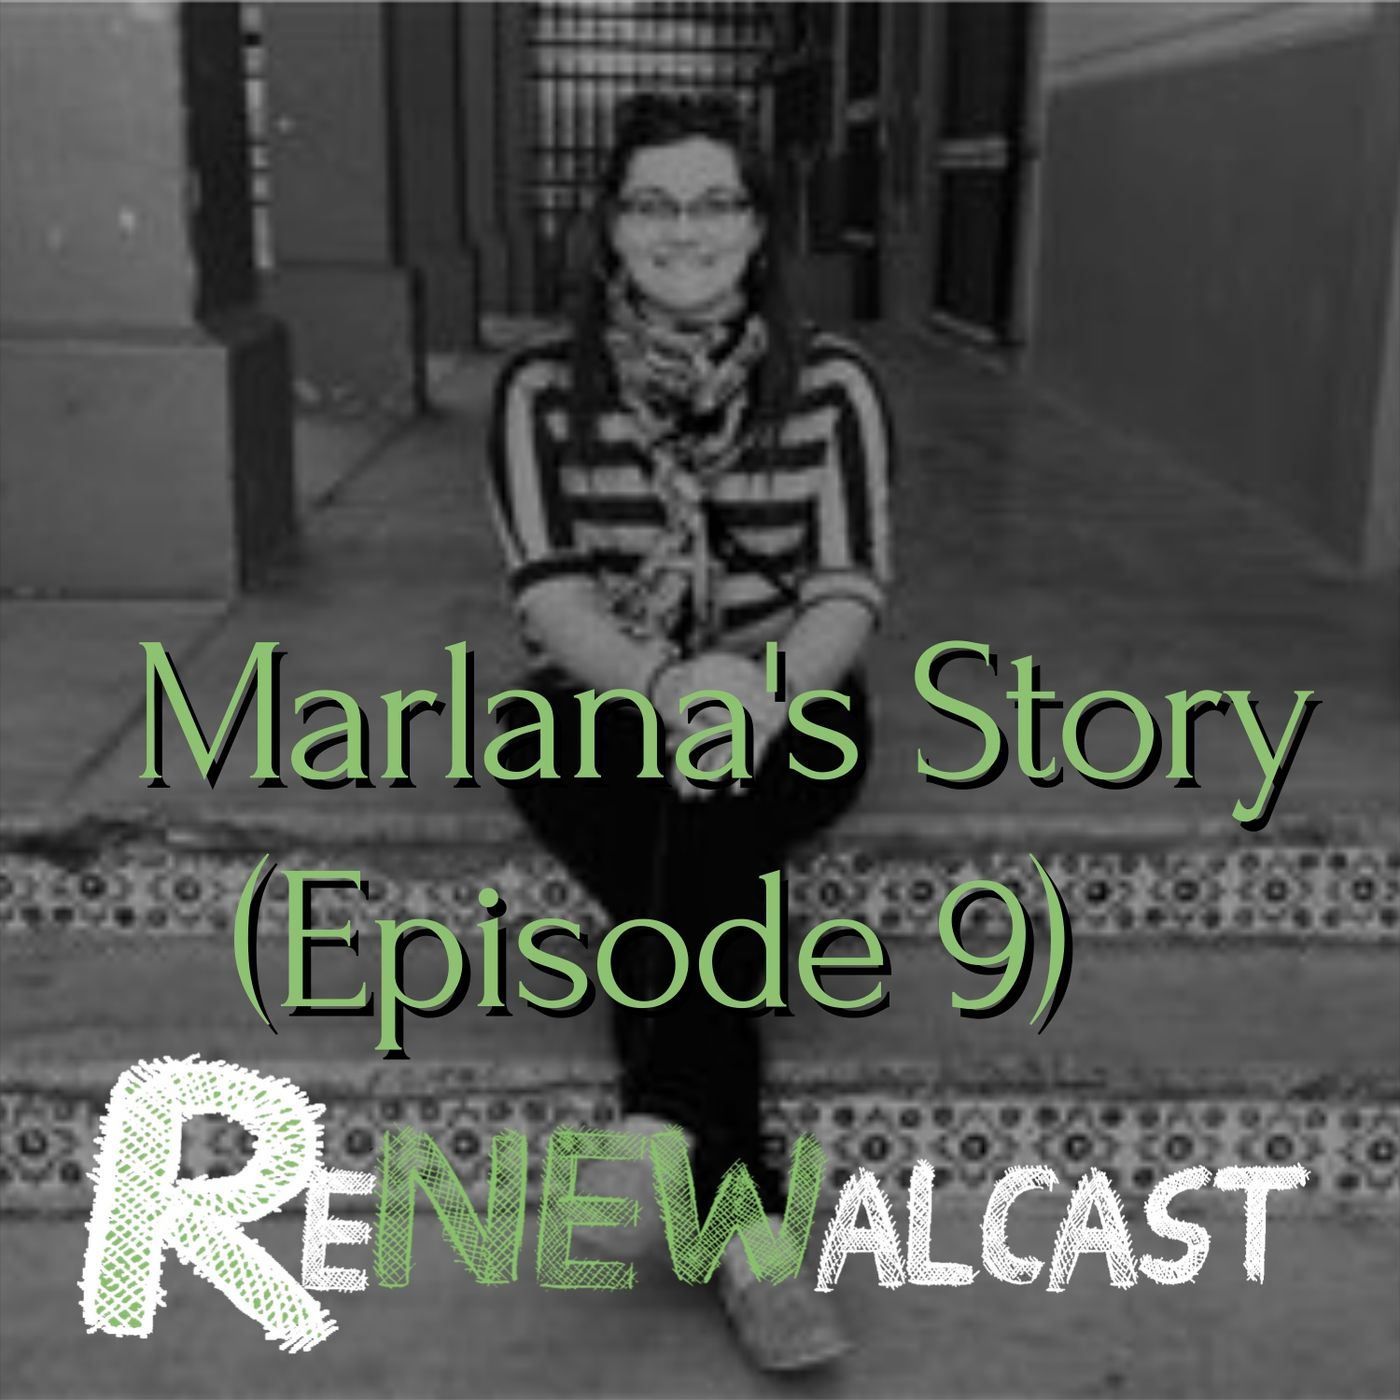 Marlana's Story (Episode 9)